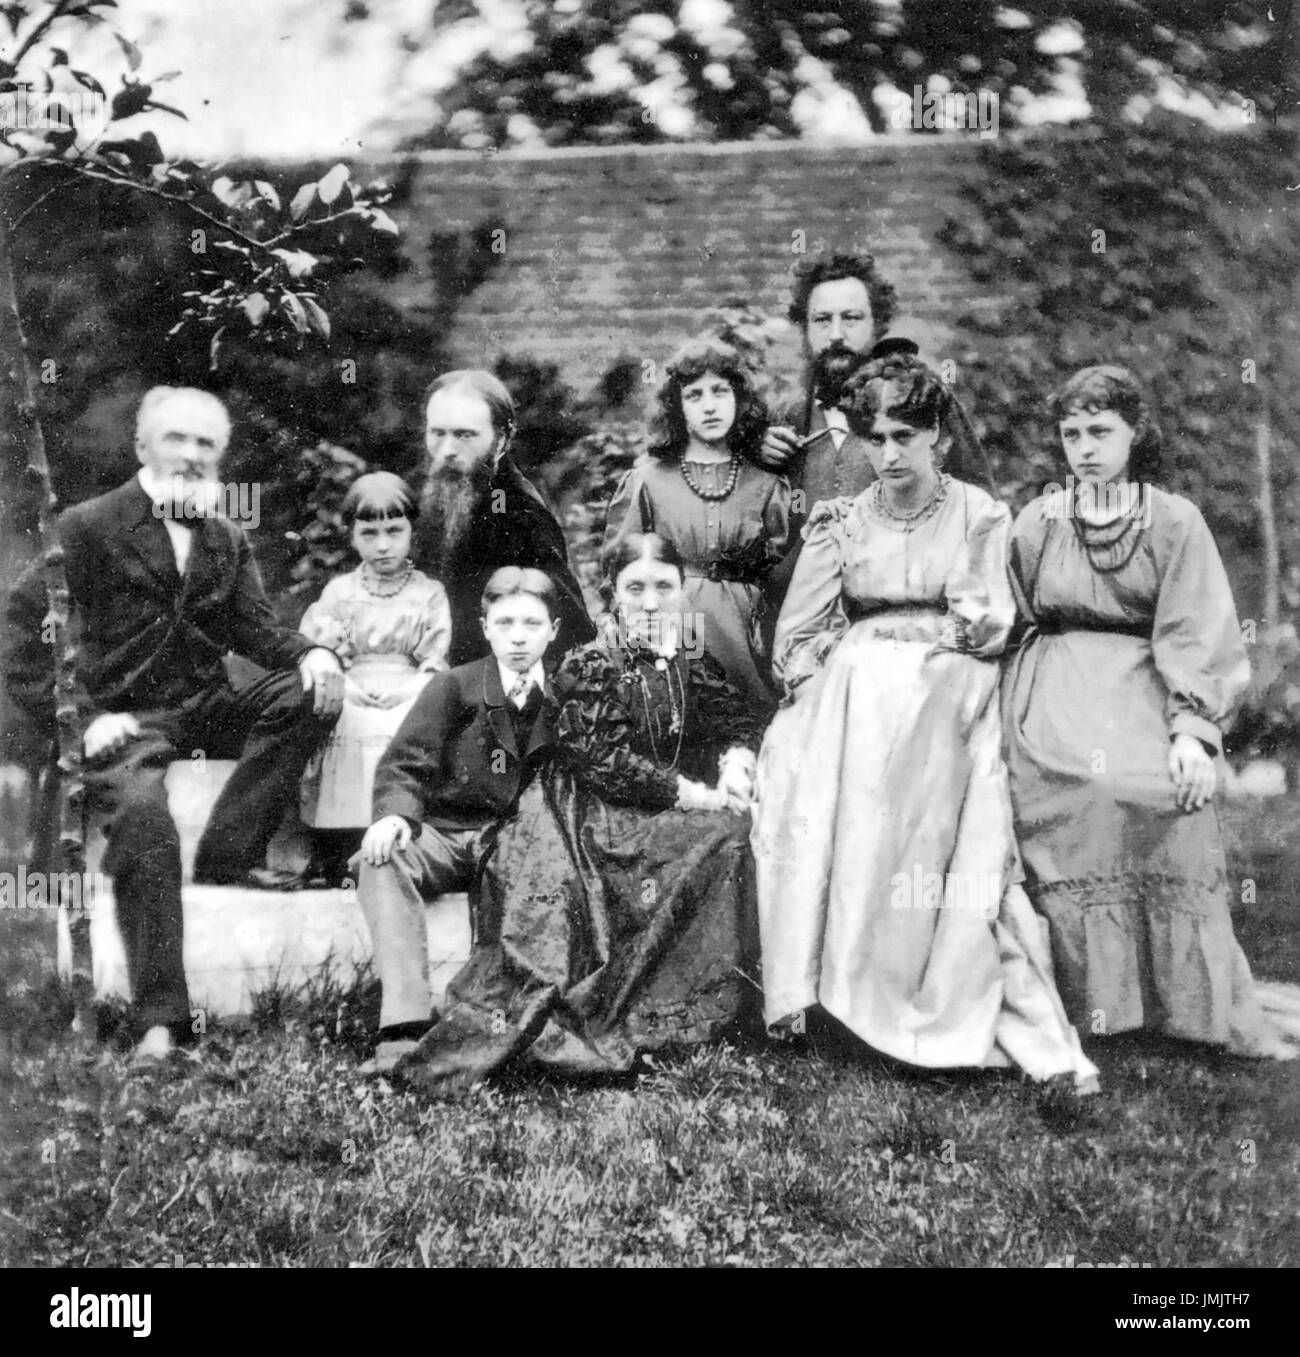 WILLIAM MORRIS The William Morris and Burne-Jones families photographed in 1874 by Frederick Hollyer at the Burne-Jones house in Fulham, south London. Morris is top right and Burne-Jones third from left. Stock Photo